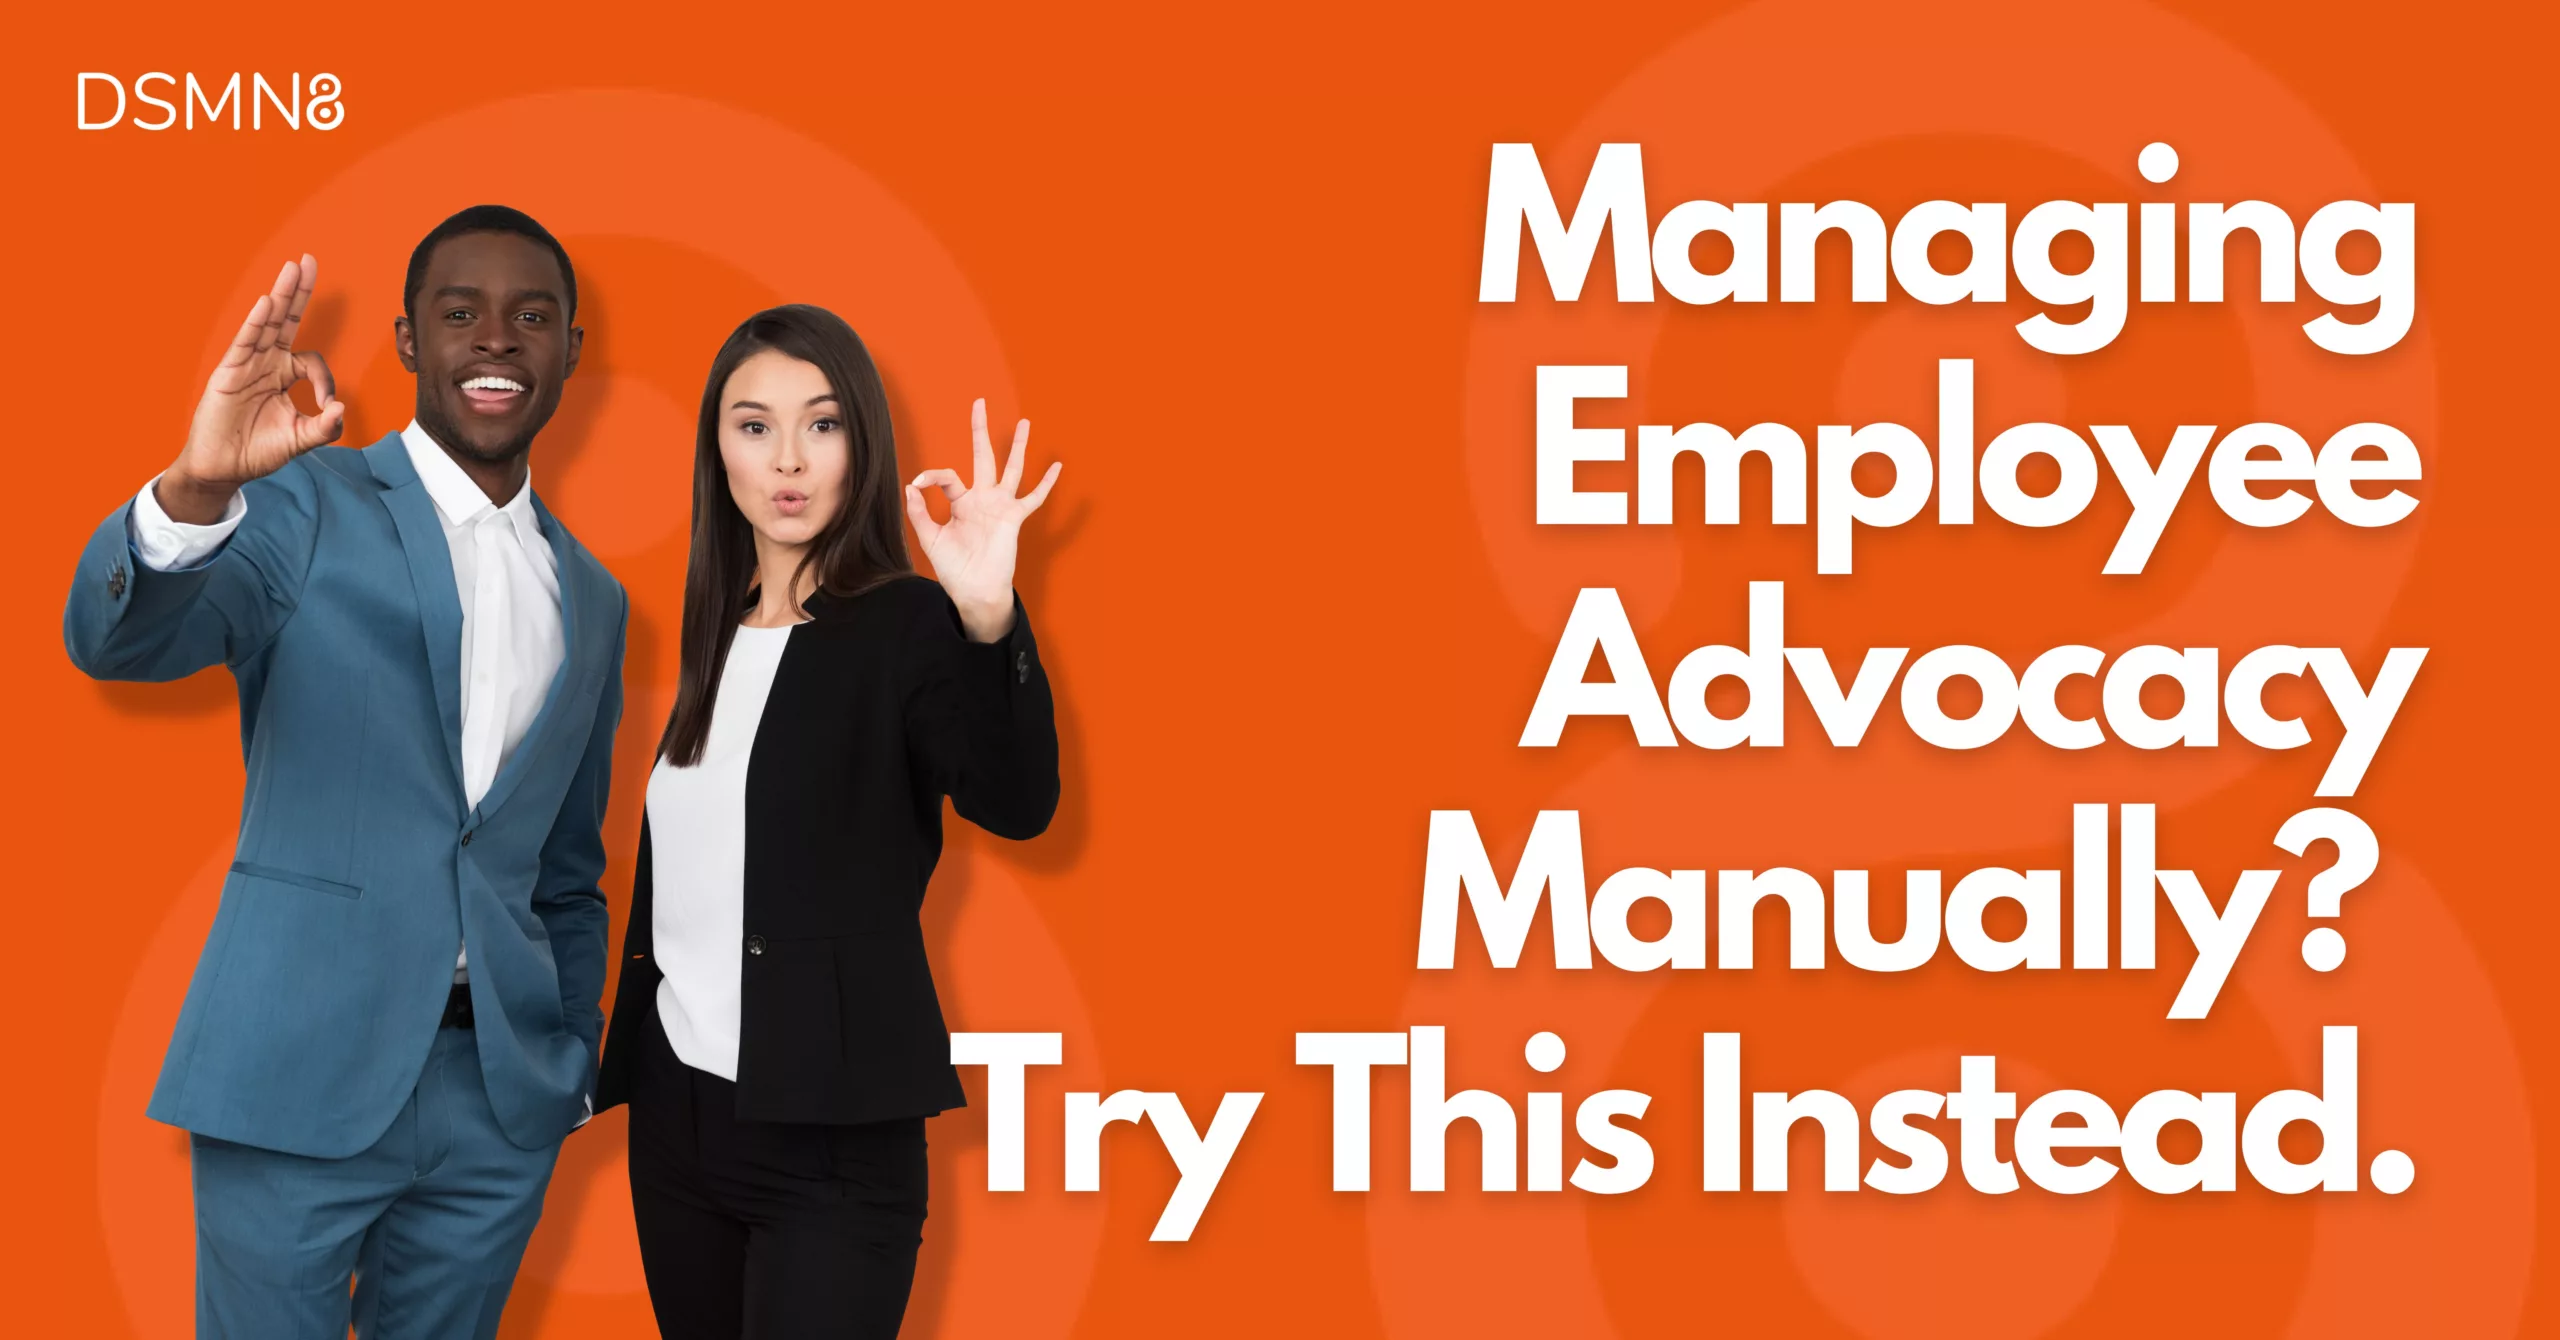 Here’s Why You Need an Employee Advocacy Tool | DSMN8 (Header)